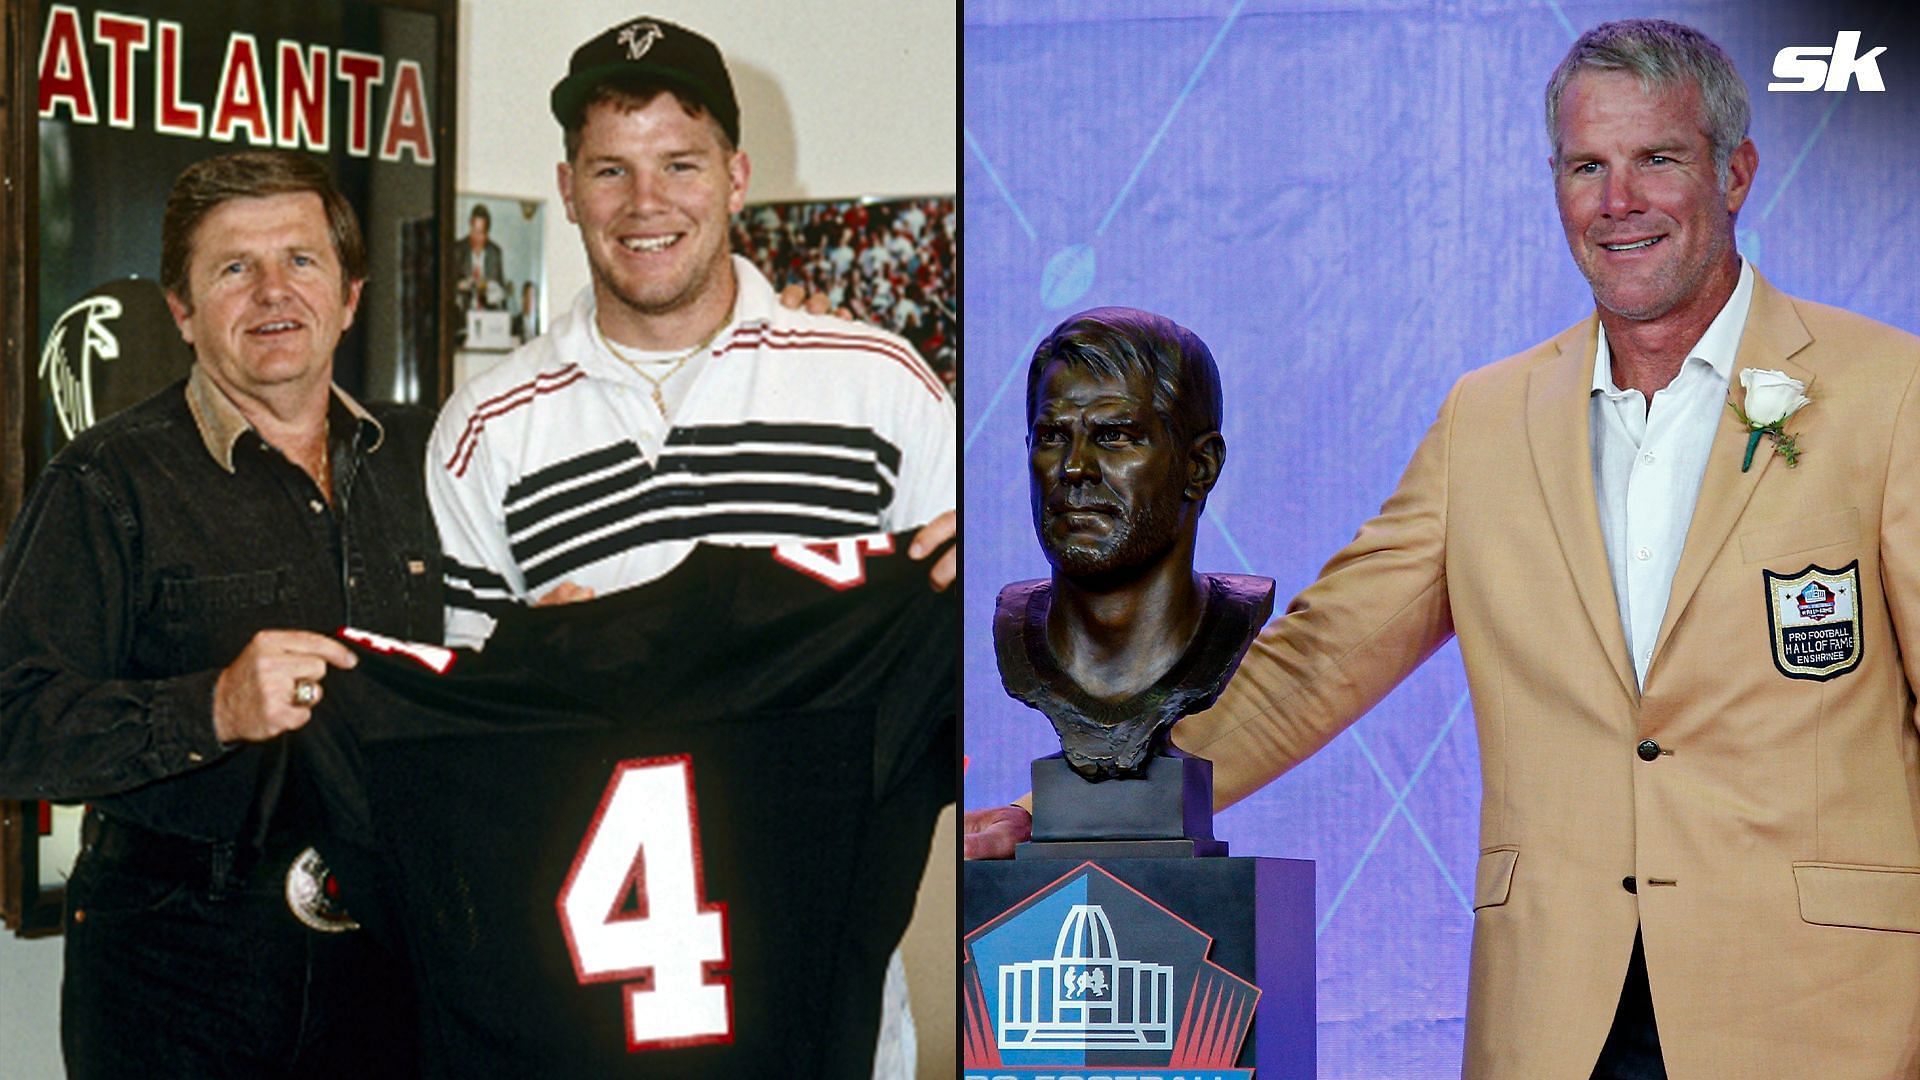 When Atlanta unearthed future Hall of Famer Brett Favre in second round of 1991 NFL Draft